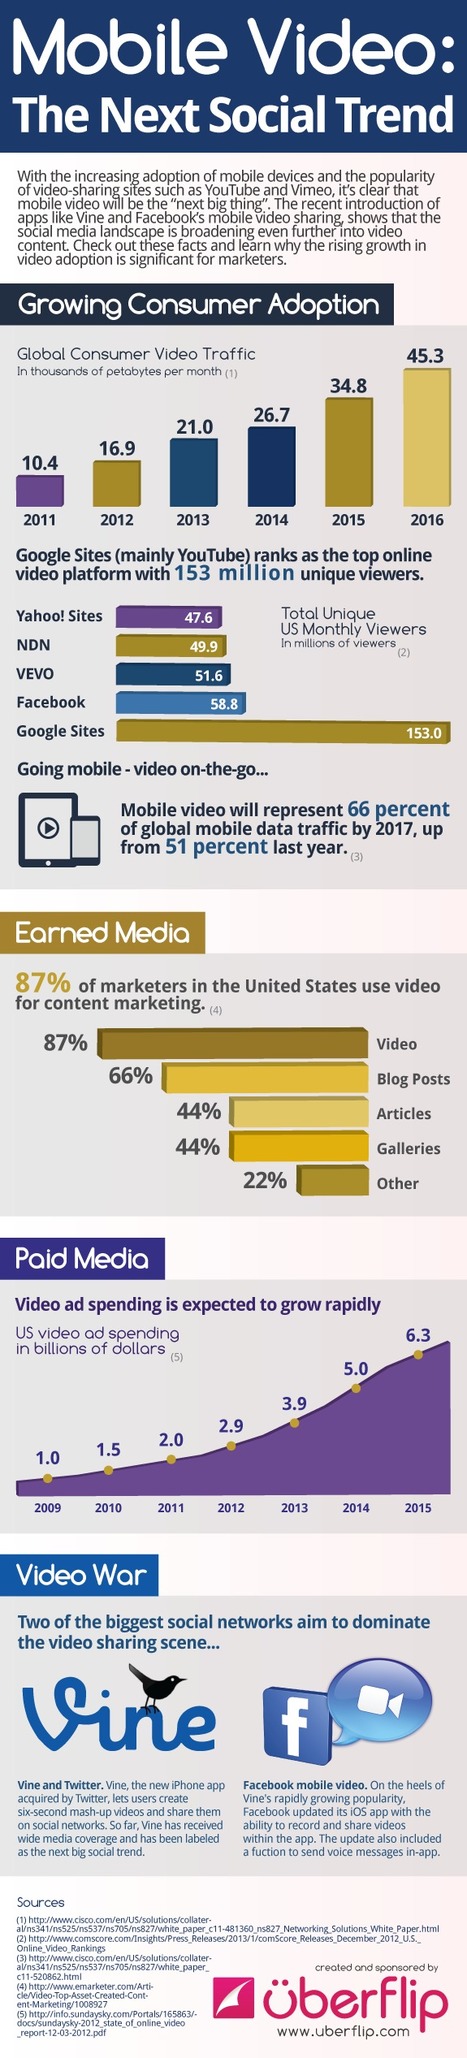 Is Mobile Video The Next Big Thing In Social Media? [INFOGRAPHIC] | FRESH | Scoop.it